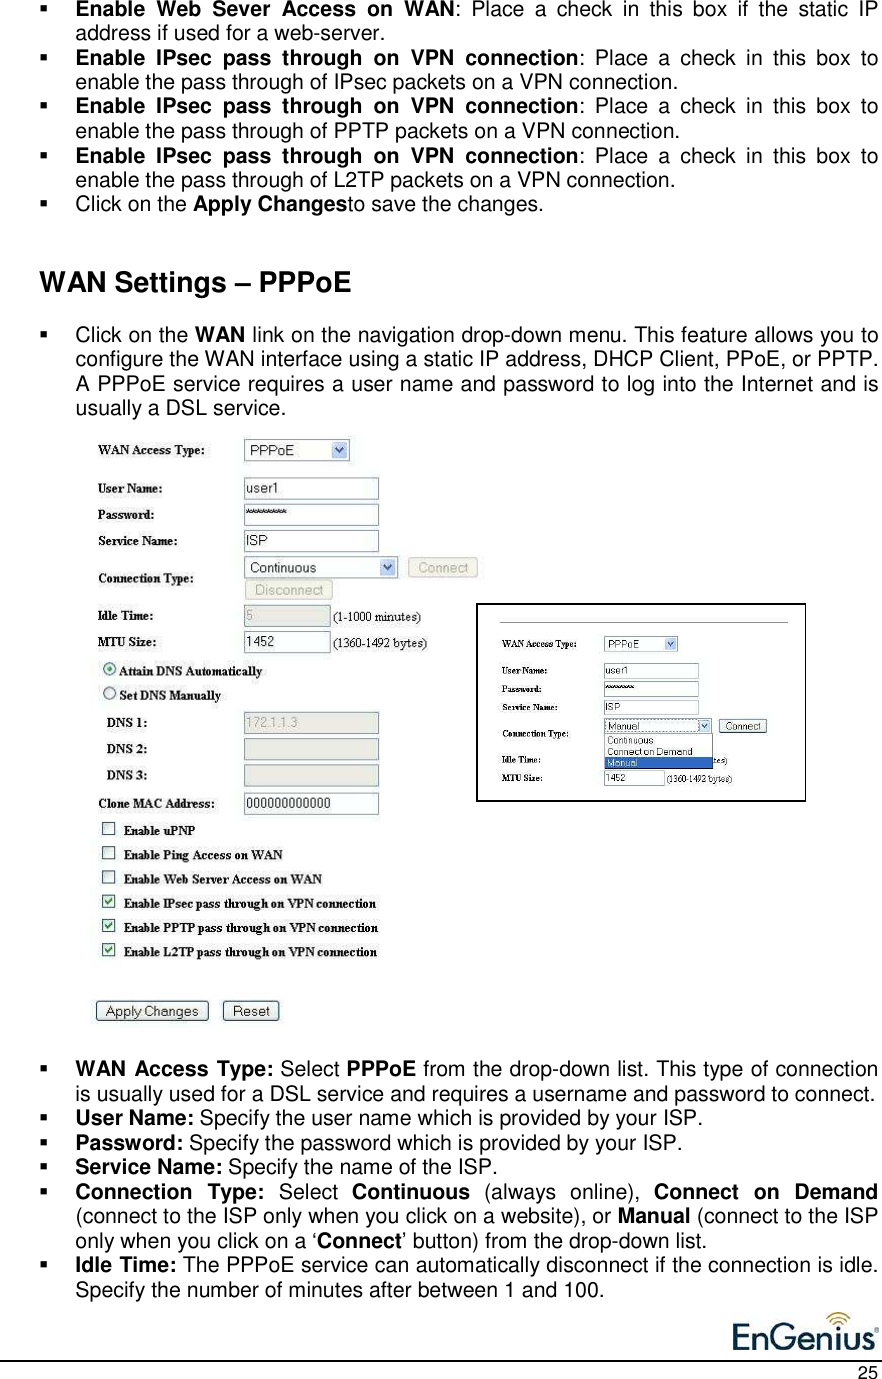    25  Enable  Web  Sever  Access  on  WAN:  Place  a  check  in  this  box  if  the  static  IP address if used for a web-server.   Enable  IPsec  pass  through  on  VPN  connection:  Place  a  check  in  this  box  to enable the pass through of IPsec packets on a VPN connection.   Enable  IPsec  pass  through  on  VPN  connection:  Place  a  check  in  this  box  to enable the pass through of PPTP packets on a VPN connection.   Enable  IPsec  pass  through  on  VPN  connection:  Place  a  check  in  this  box  to enable the pass through of L2TP packets on a VPN connection.    Click on the Apply Changesto save the changes.      WAN Settings – PPPoE   Click on the WAN link on the navigation drop-down menu. This feature allows you to configure the WAN interface using a static IP address, DHCP Client, PPoE, or PPTP.  A PPPoE service requires a user name and password to log into the Internet and is usually a DSL service.                             WAN Access Type: Select PPPoE from the drop-down list. This type of connection is usually used for a DSL service and requires a username and password to connect.   User Name: Specify the user name which is provided by your ISP.  Password: Specify the password which is provided by your ISP.  Service Name: Specify the name of the ISP.   Connection  Type:  Select  Continuous  (always  online),  Connect  on  Demand (connect to the ISP only when you click on a website), or Manual (connect to the ISP only when you click on a ‘Connect’ button) from the drop-down list.   Idle Time: The PPPoE service can automatically disconnect if the connection is idle. Specify the number of minutes after between 1 and 100.   